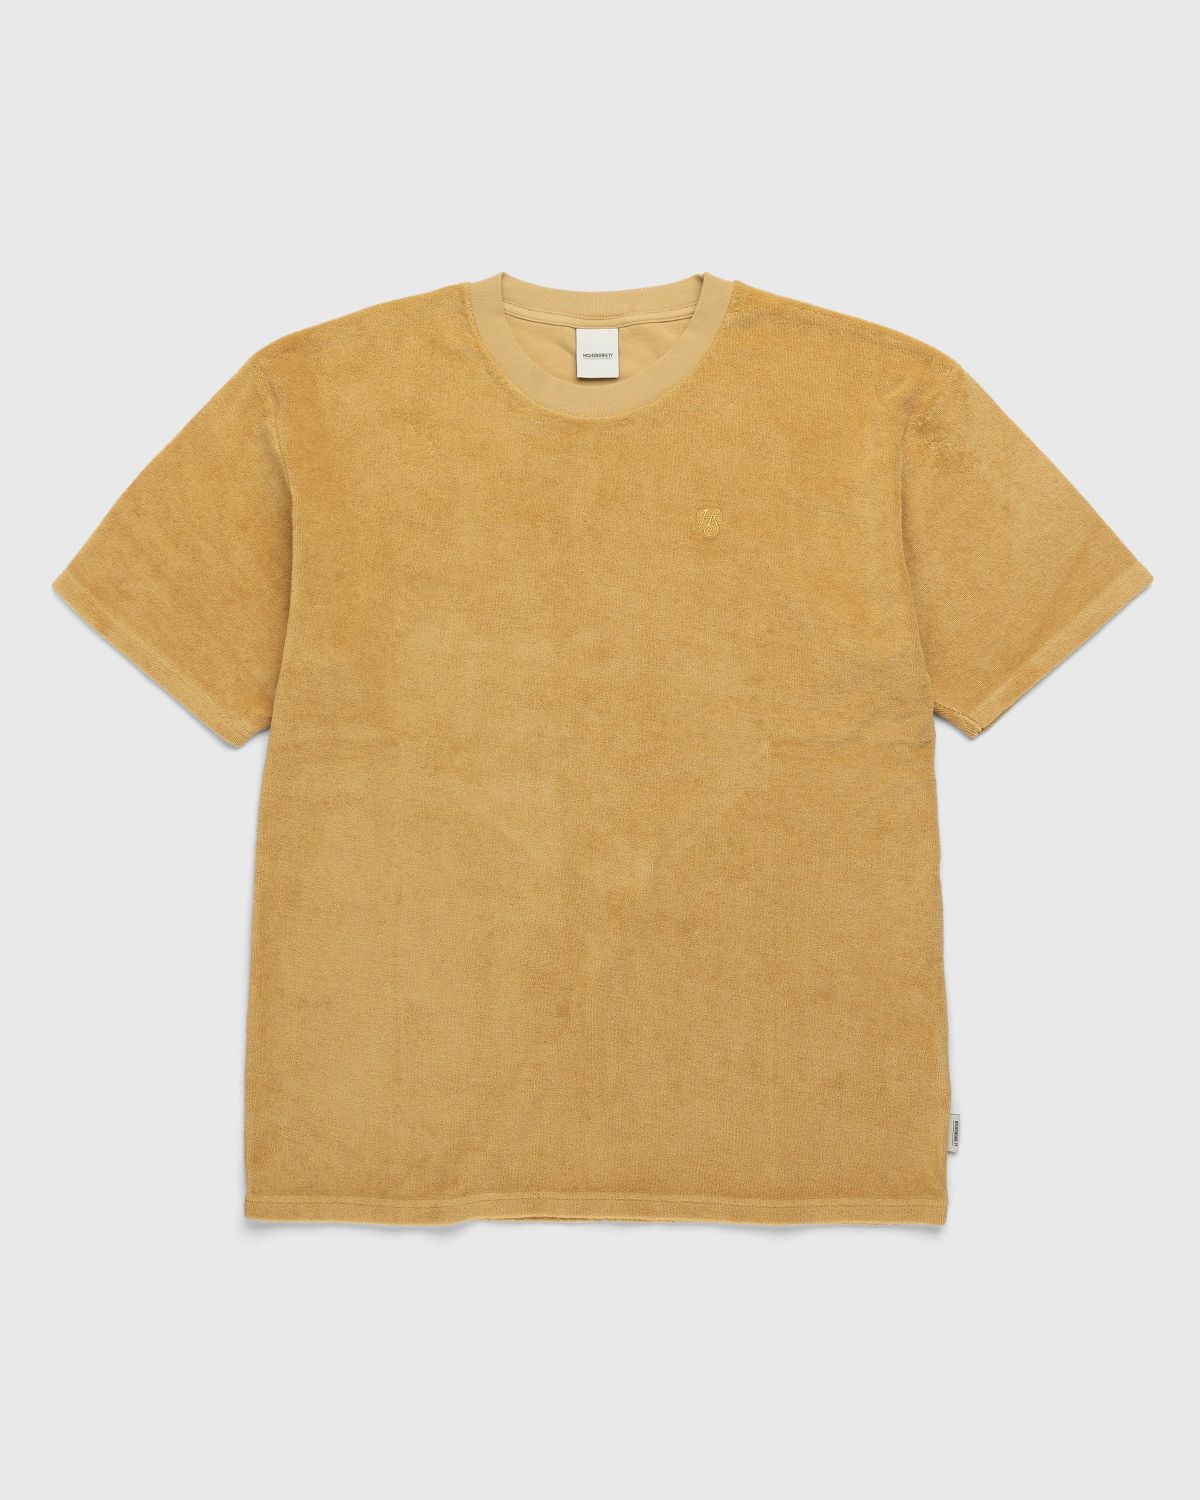 Highsnobiety – HS Logo Reverse Terry T-Shirt Brown - Tops - Brown - Image 1